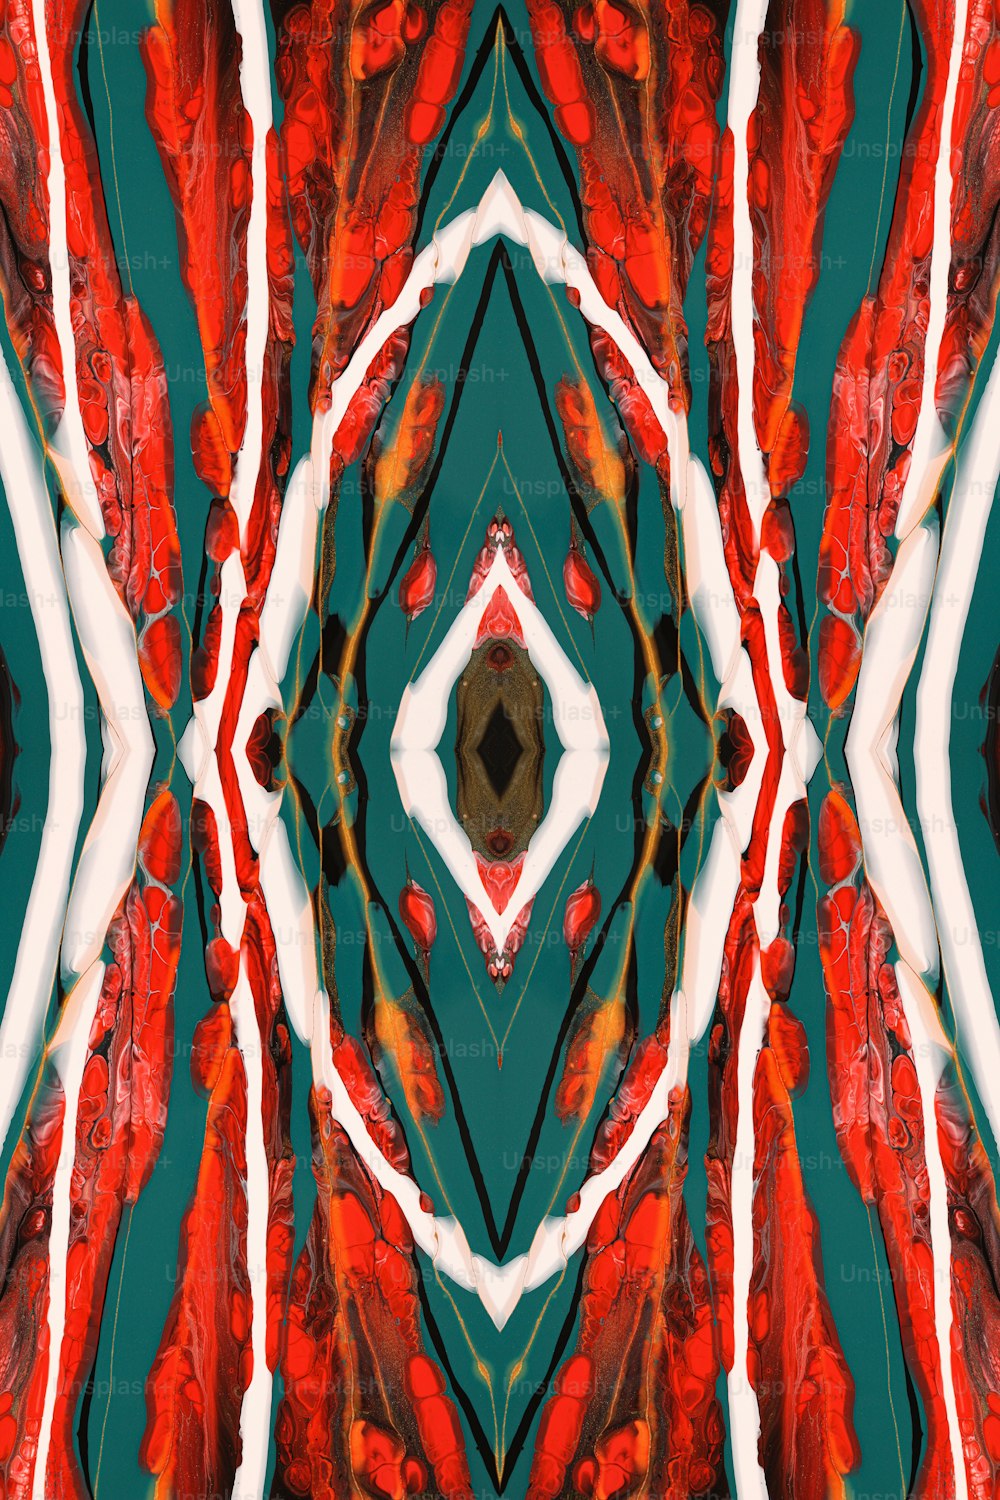 an abstract image of a red and green pattern